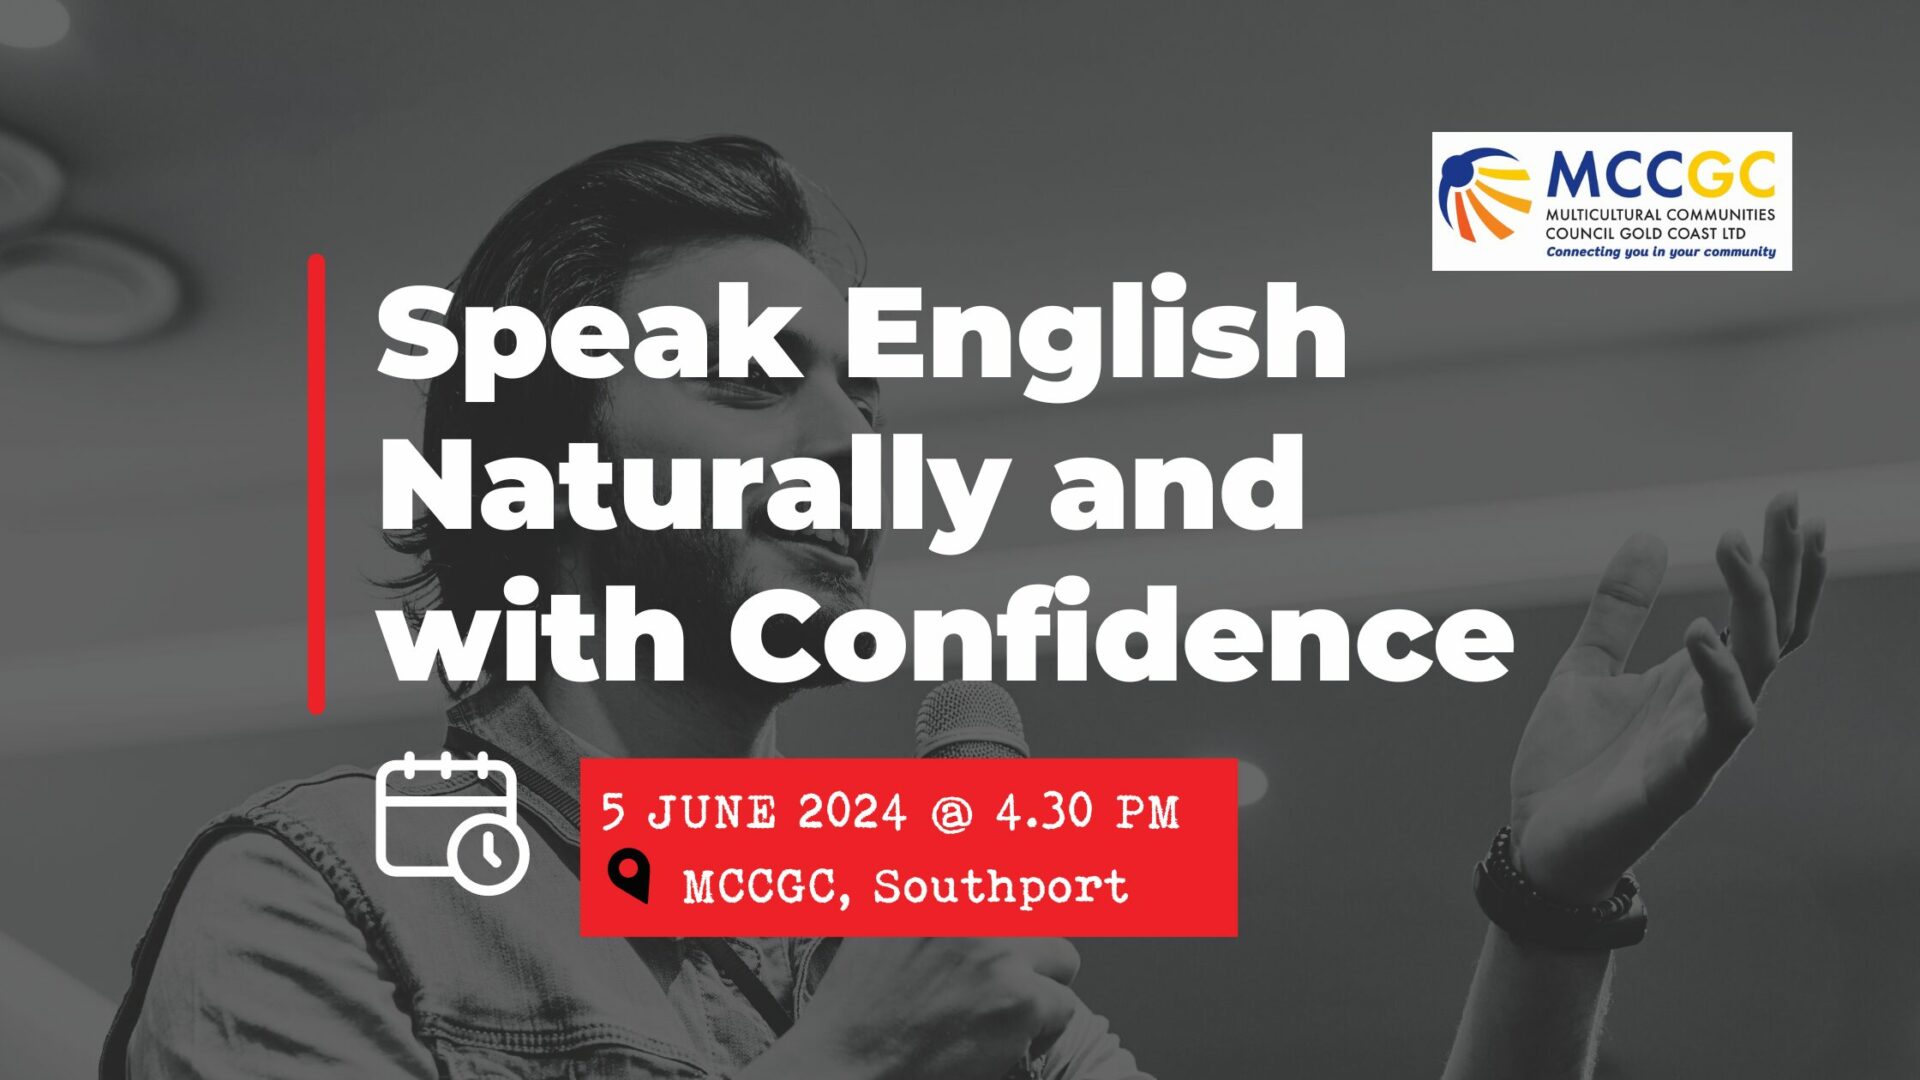 5 June 2024: Speak English Naturally and With Confidence Workshop